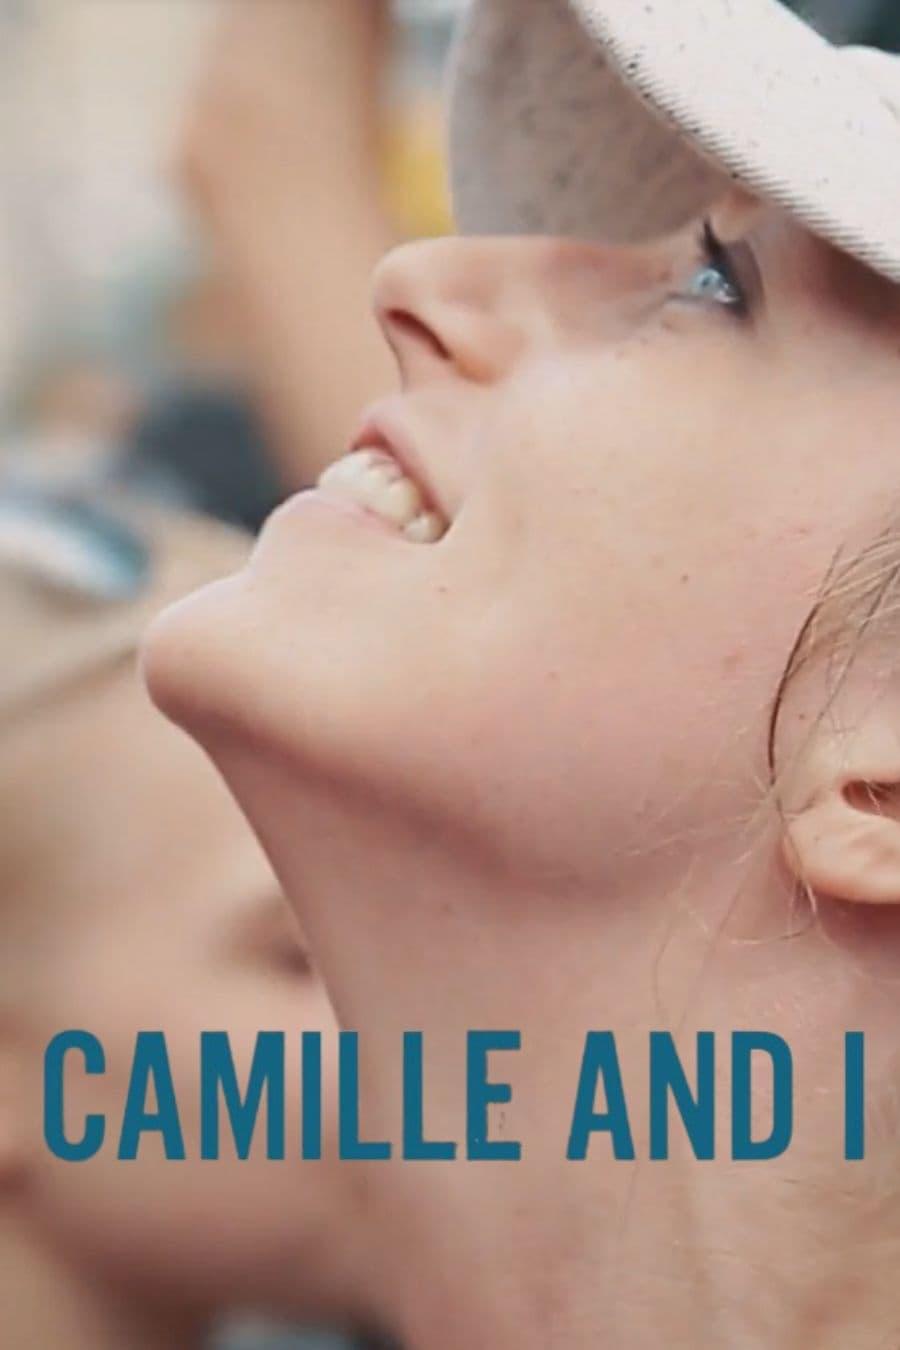 Camille and I poster